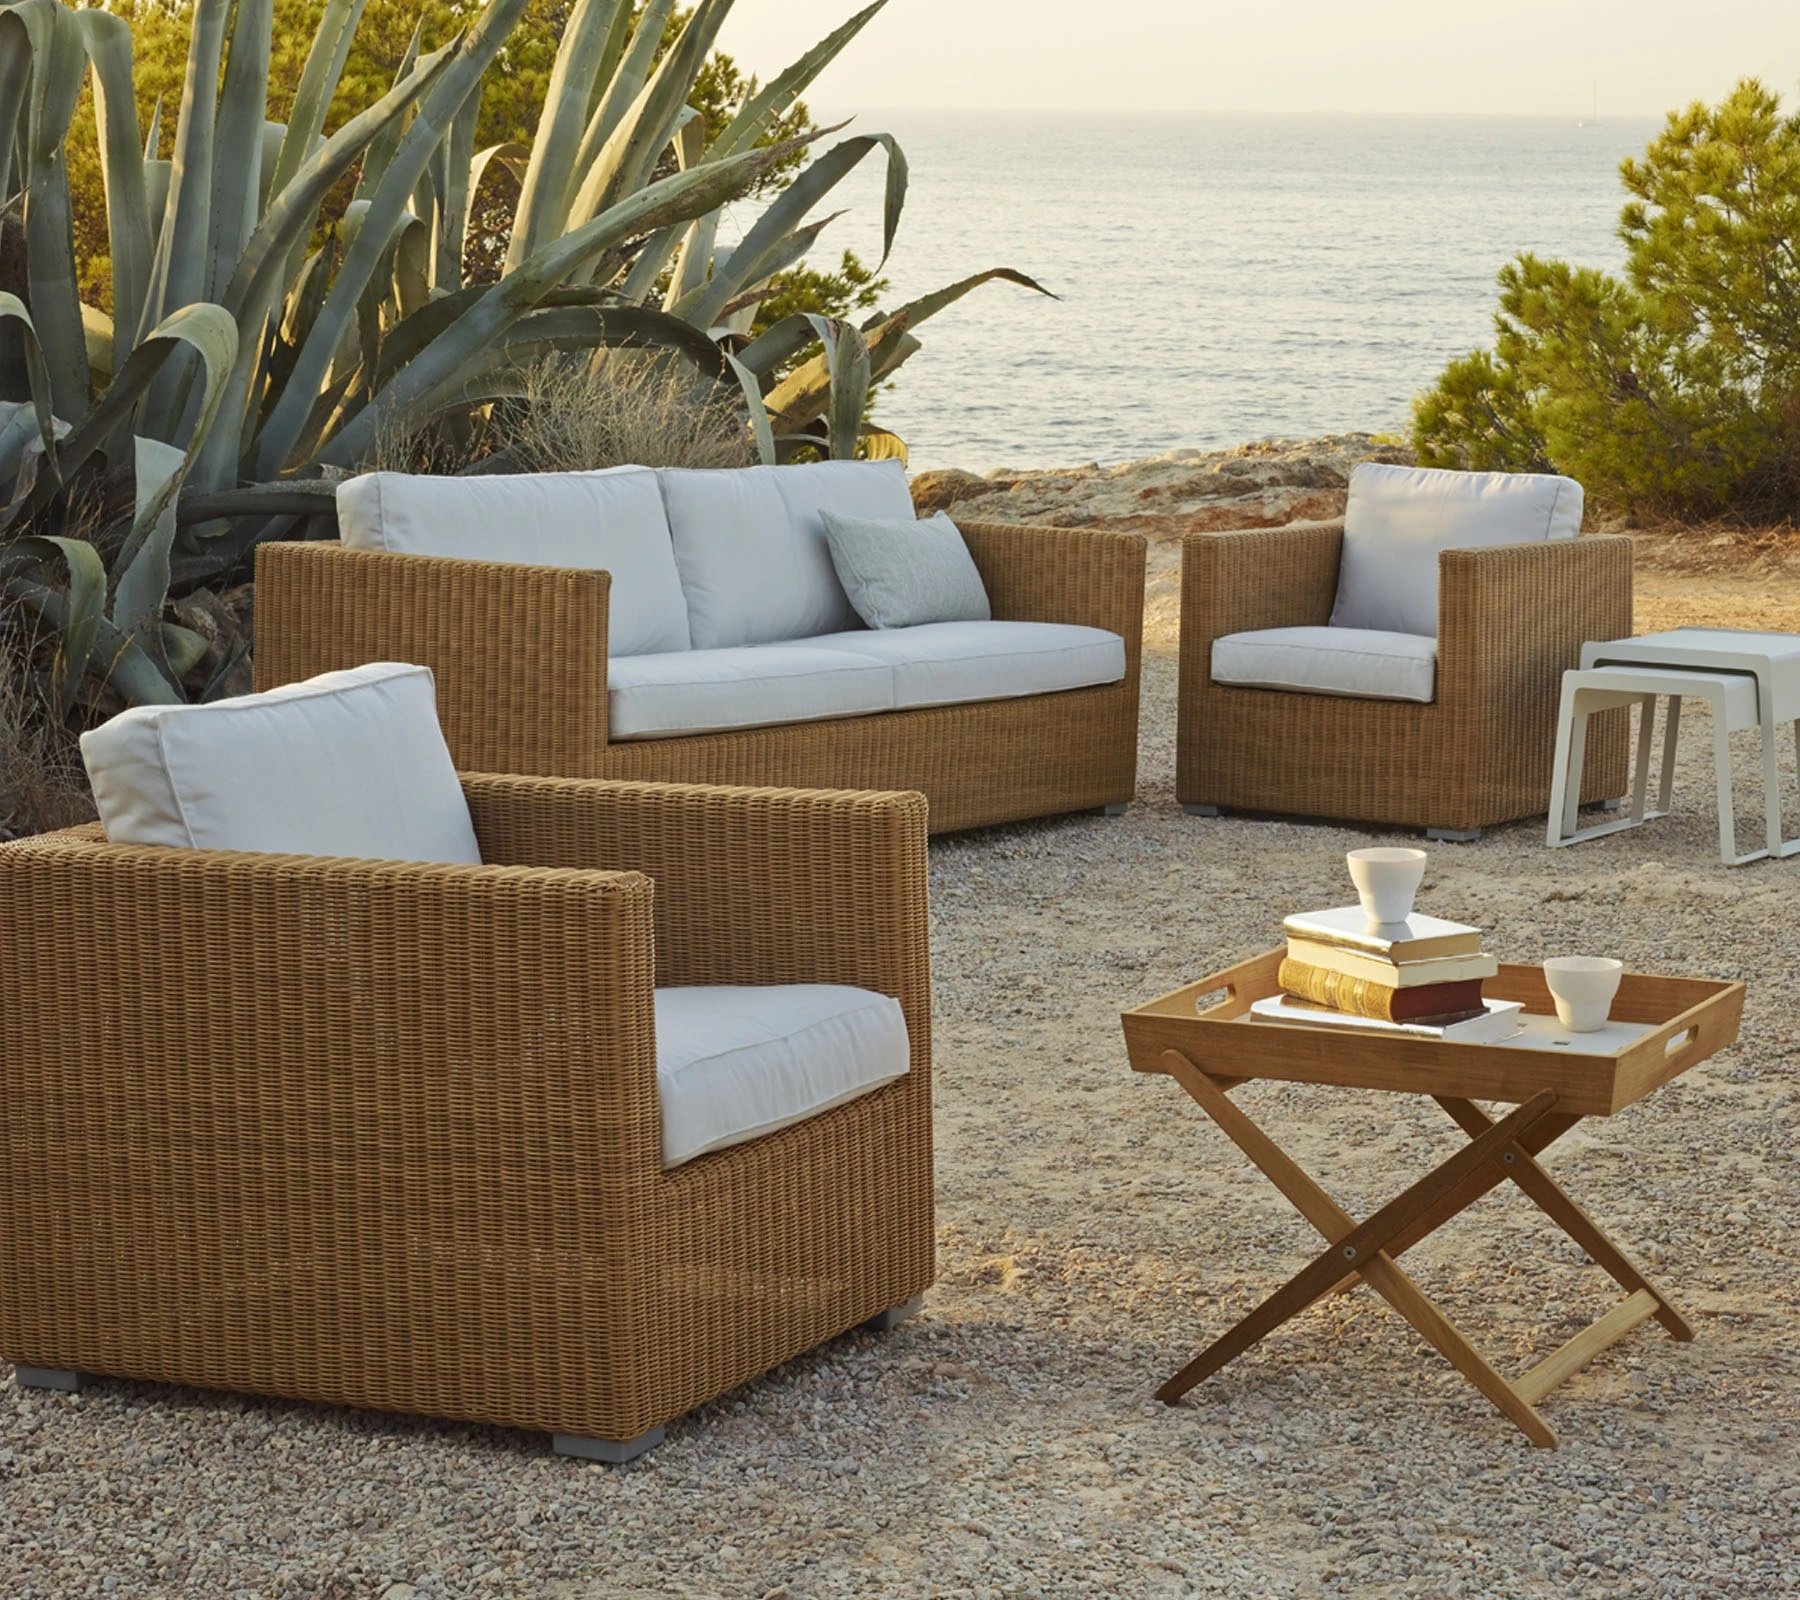 Cane-line Chester 3-Seater Sofa | Wooden | Outdoor-Patio Furniture ...